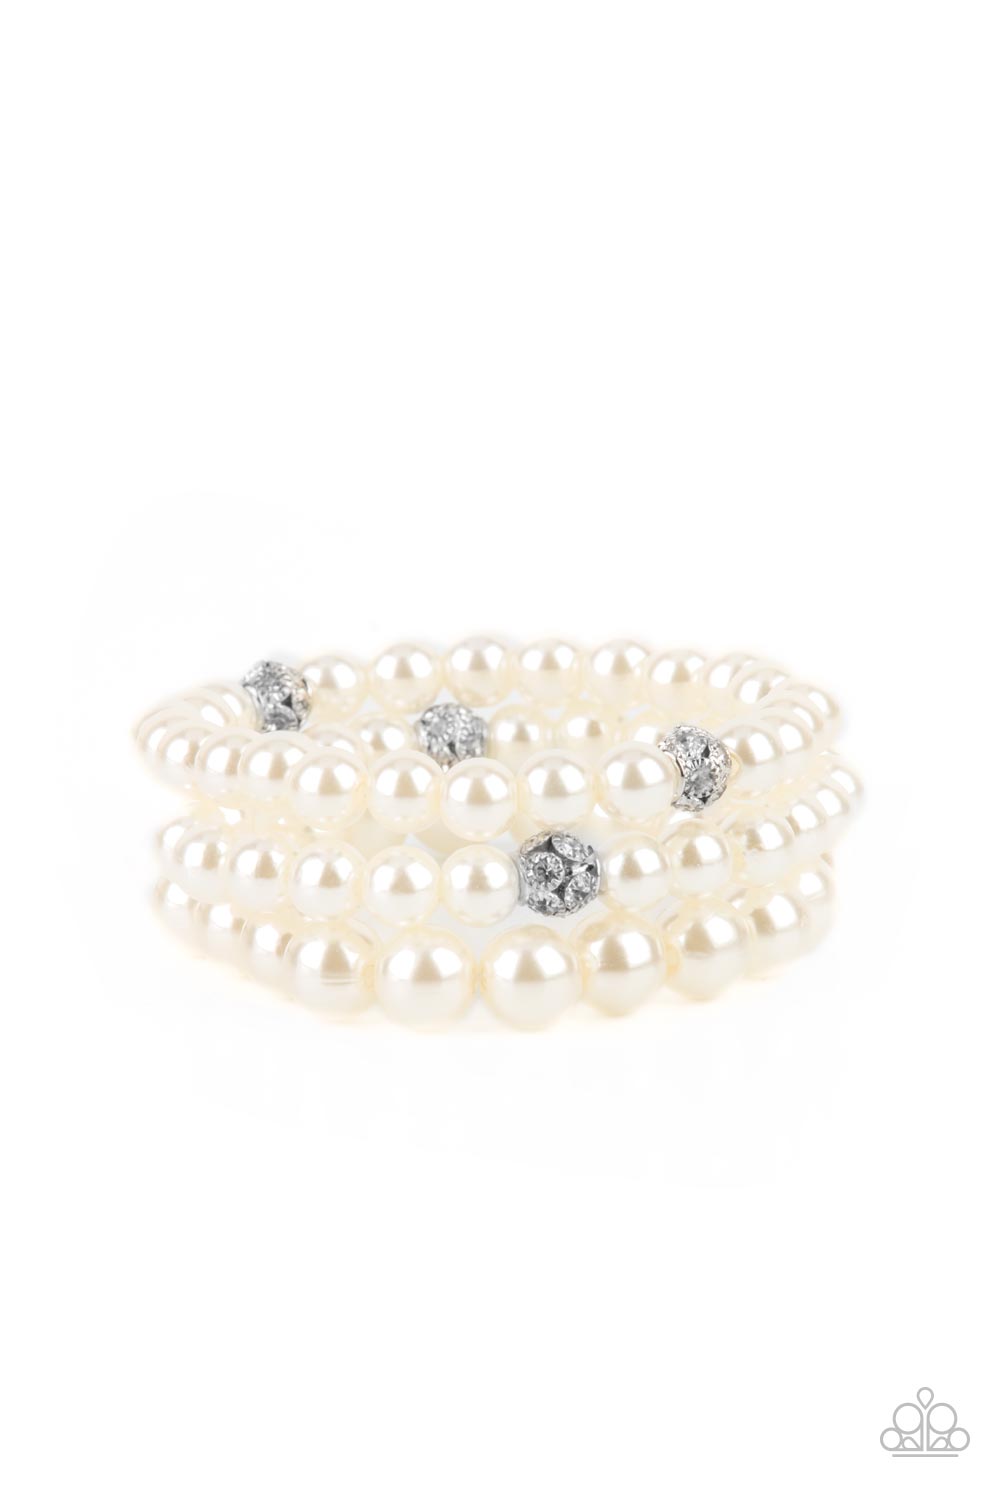 Paparazzi Here Comes The Heiress - White Bracelet - A Finishing Touch Jewelry